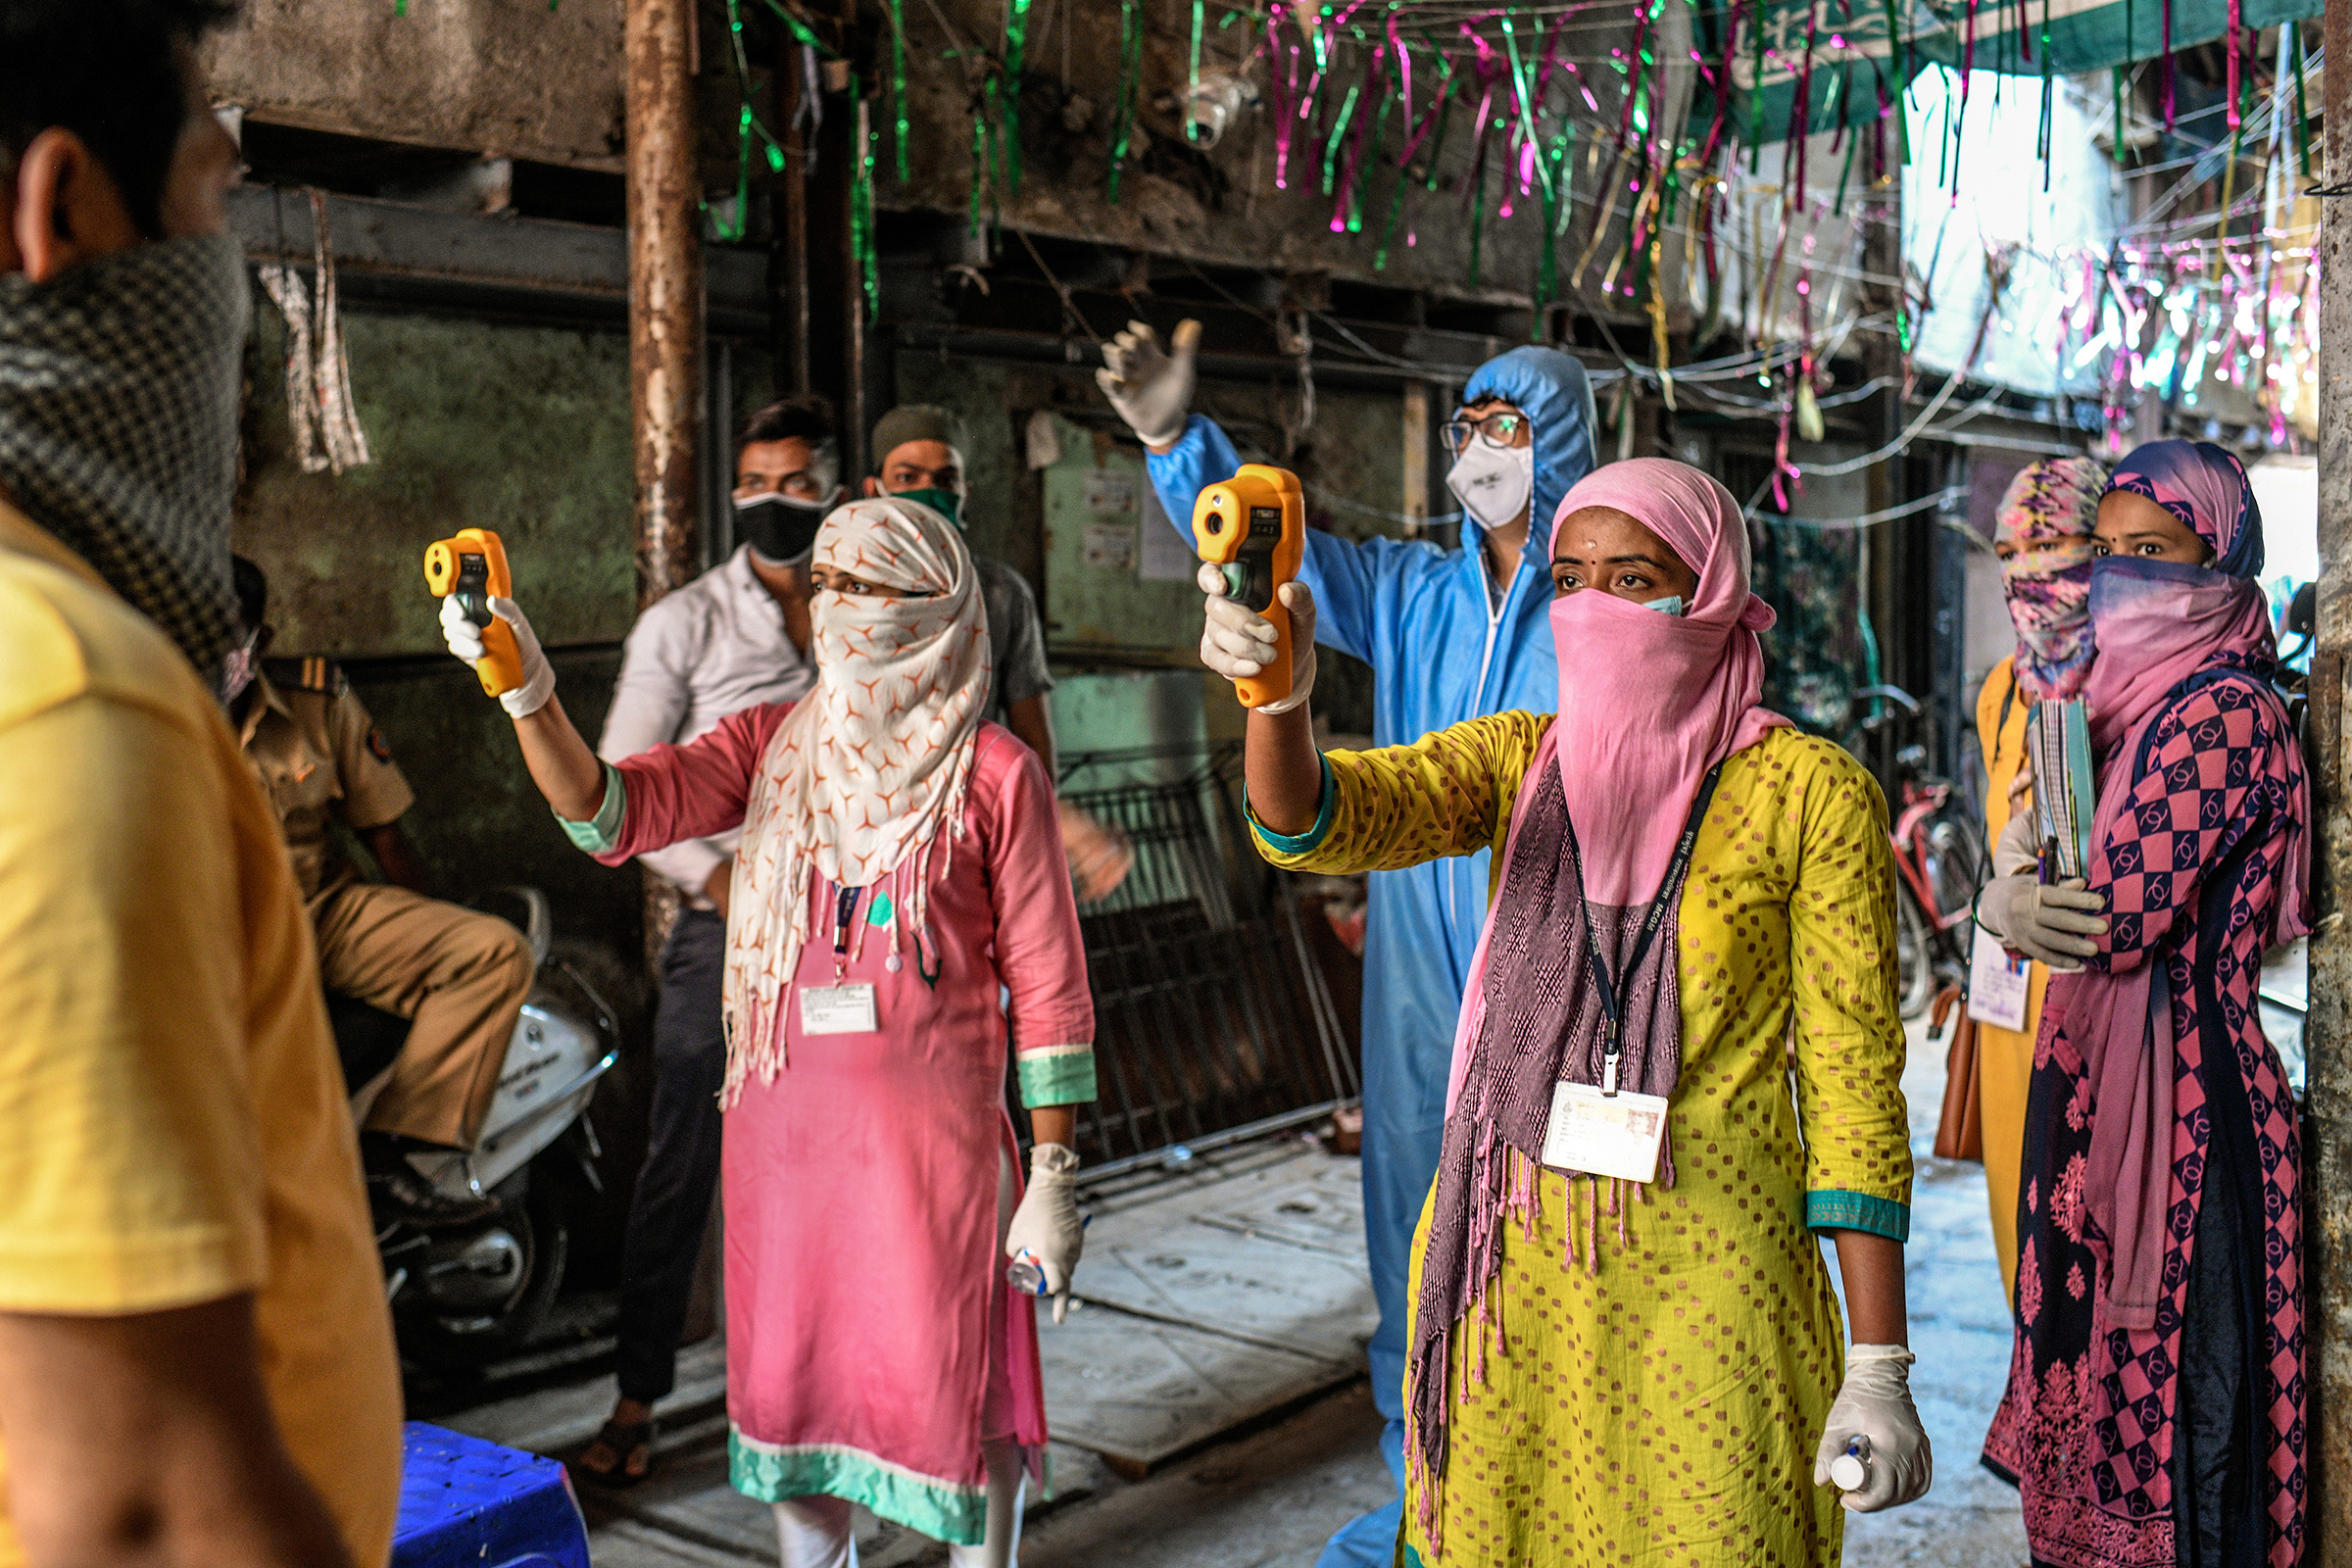 Health workers check residents' temperatures during a mass screening for COVID-19 symptoms in Dharavi in April. (Atul Loke—Panos Pictures/Redux)